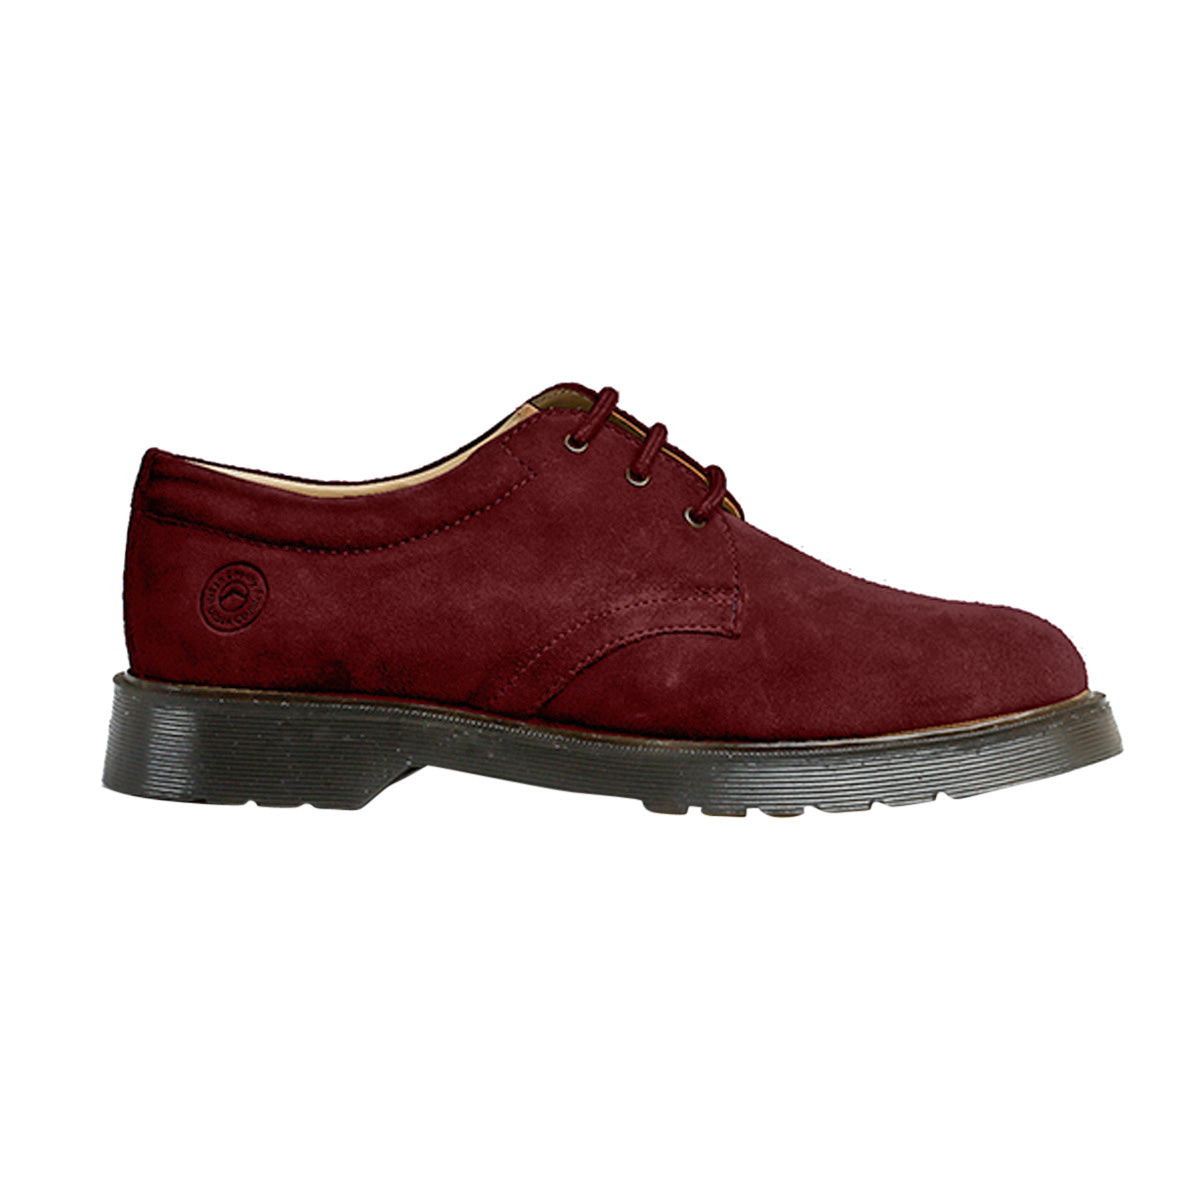 Men suede Leather Casuals ǀ BARRY 8200